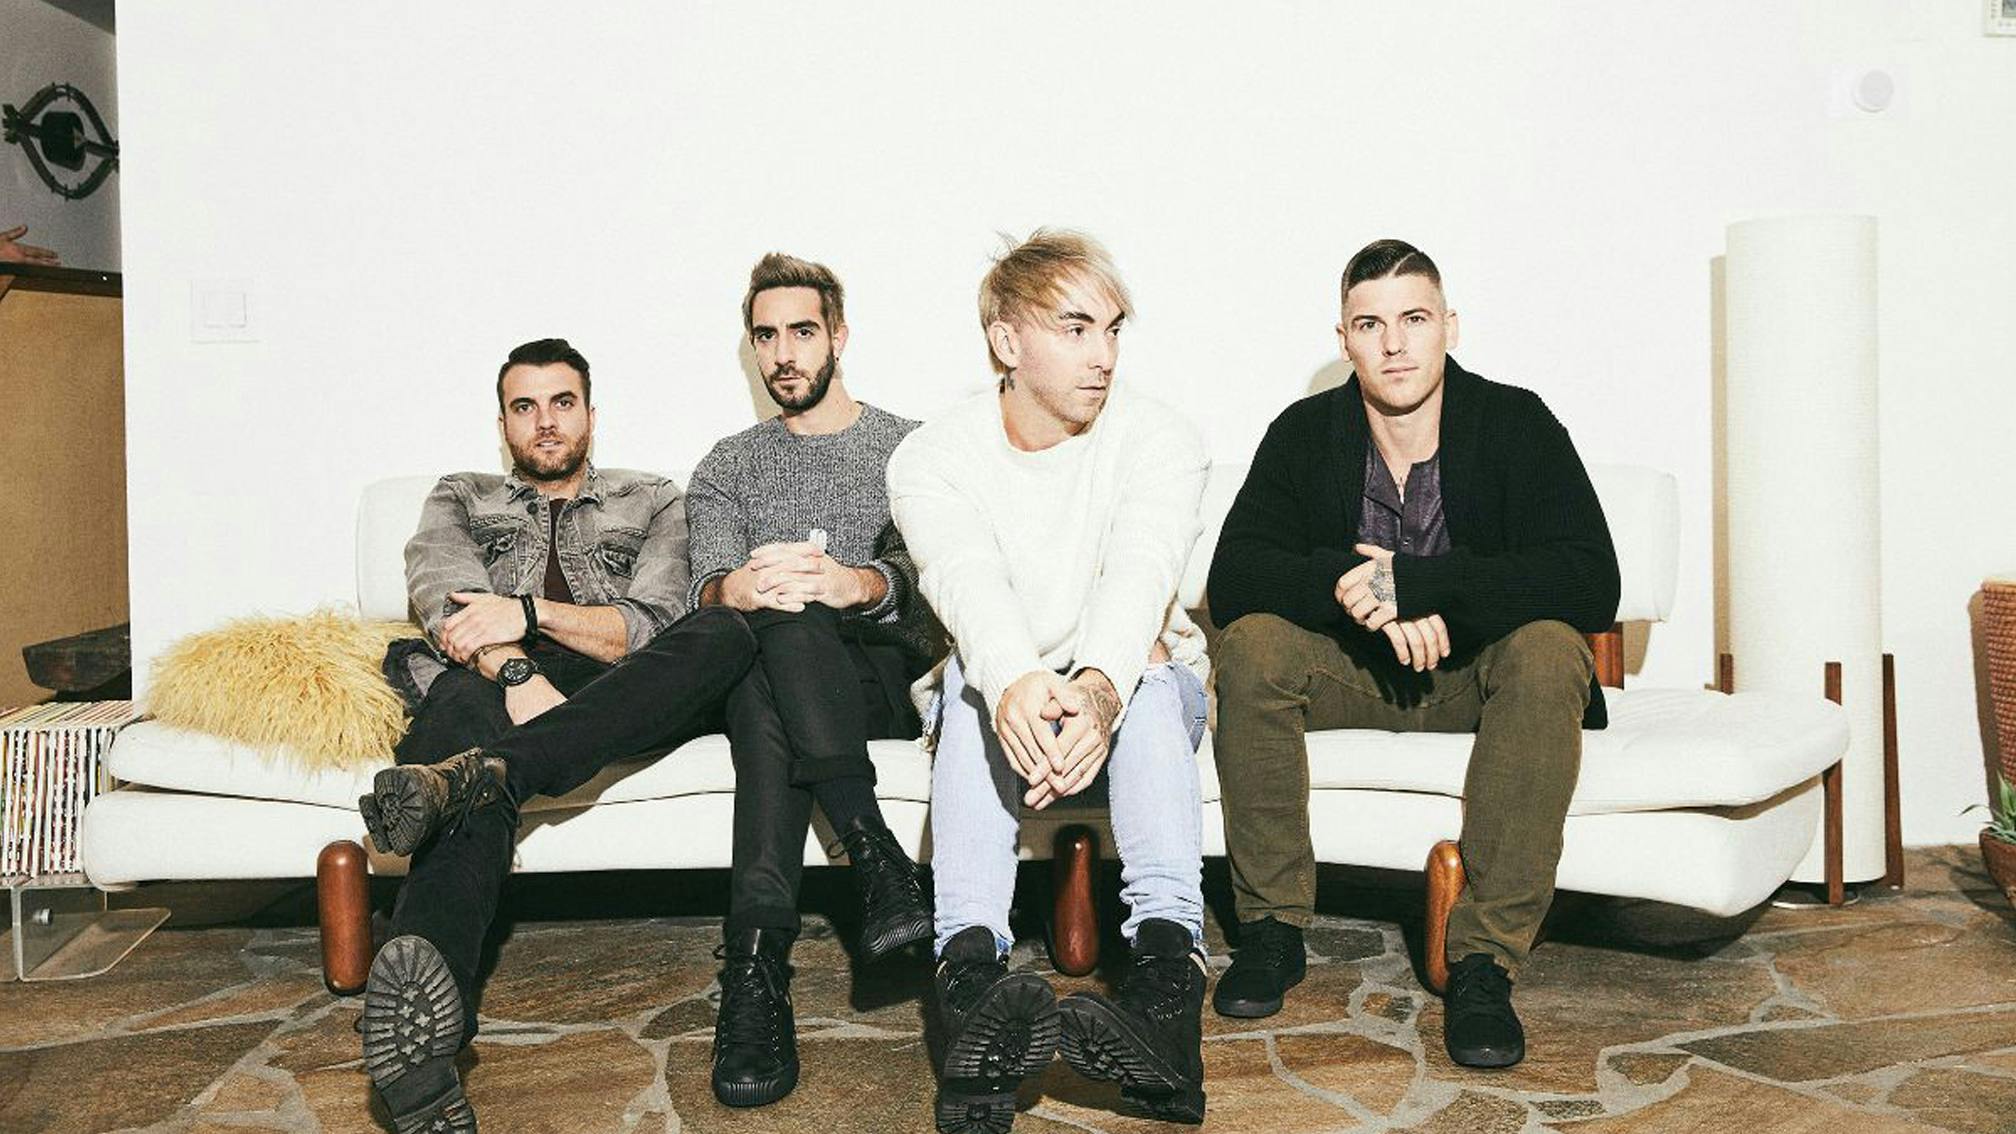 All Time Low's Alex Gaskarth on collaborating with blackbear and The Band CAMINO